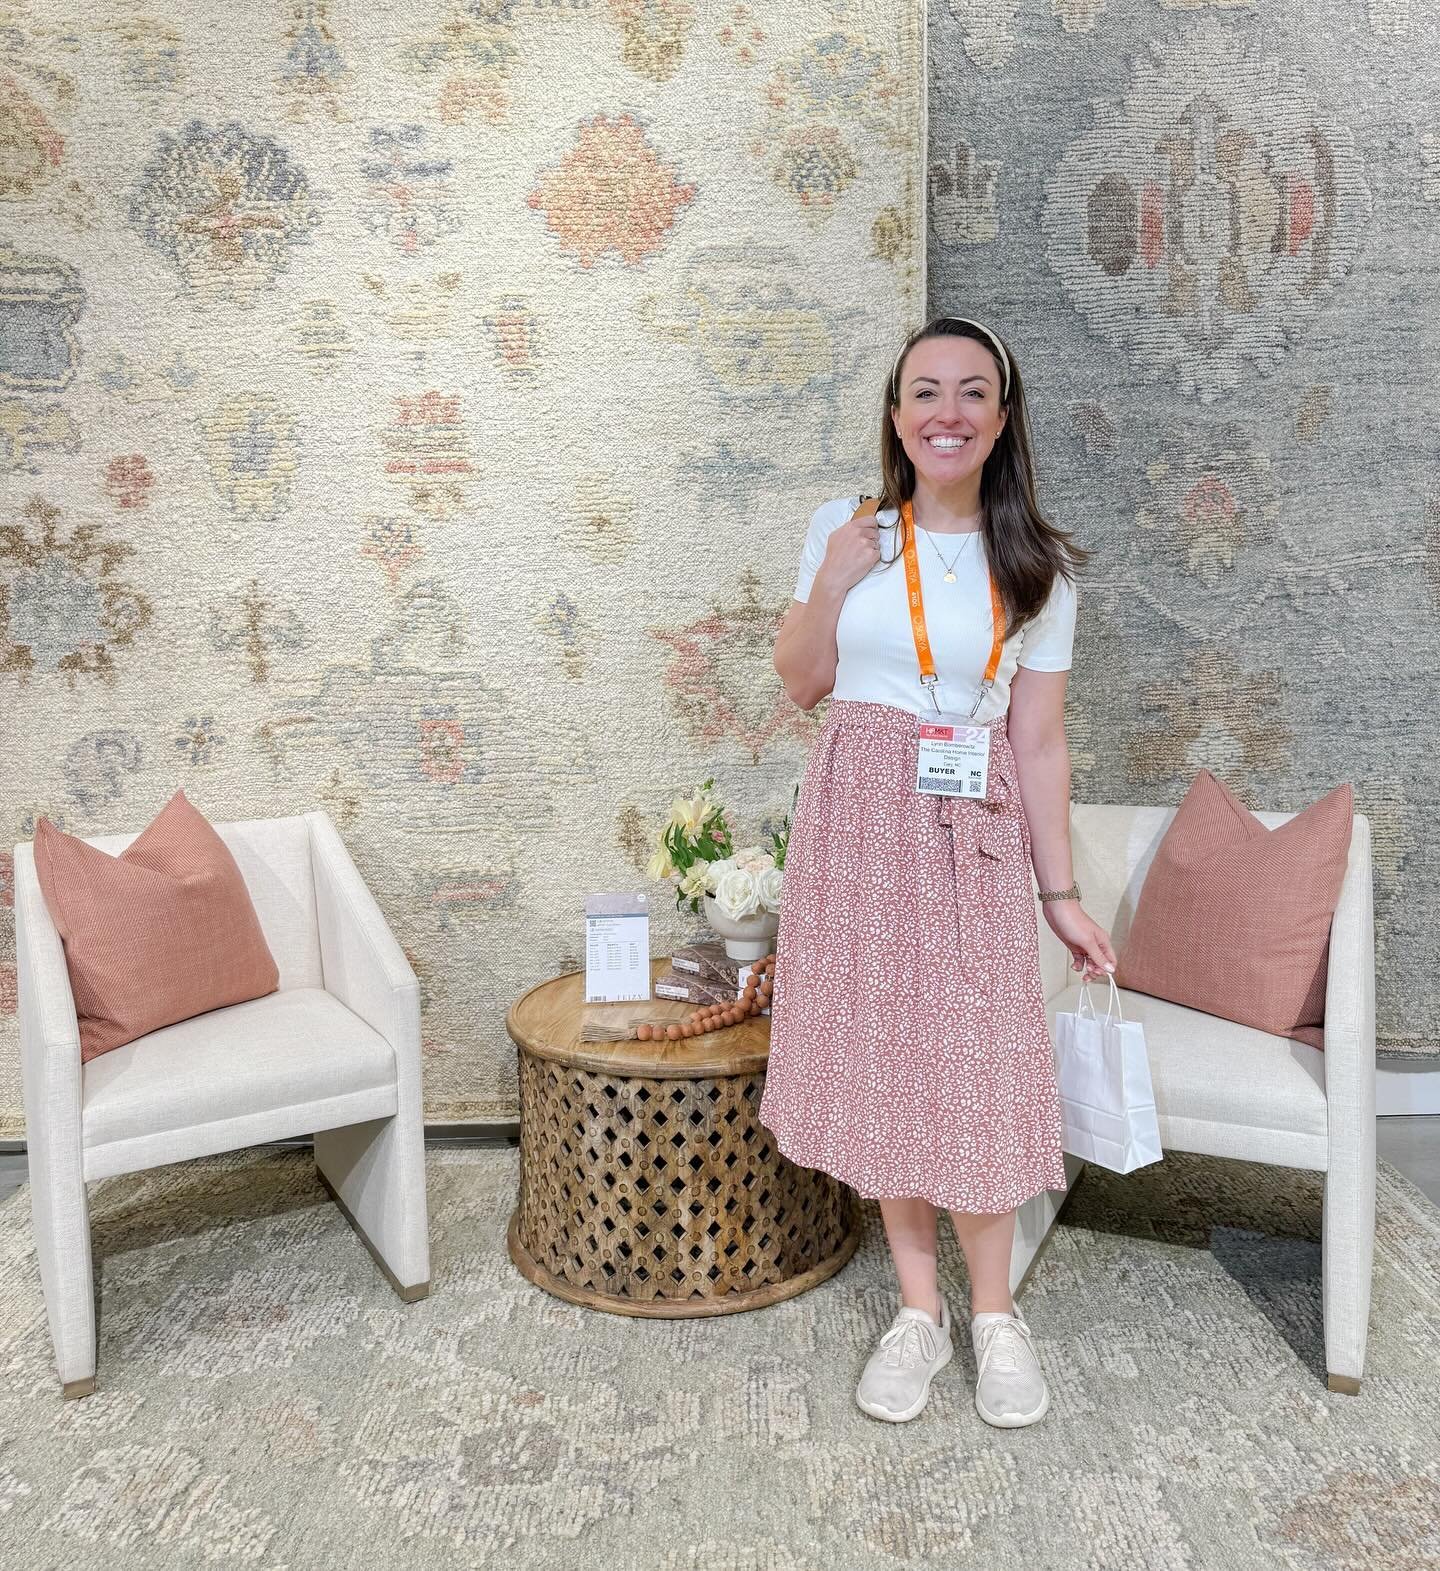 Just a quick in and out at @highpointmarket this spring! Take a spin through a few of our faves looks. 

@themtcompany 
@highlandhousefurniture 
@feizyrugs 
@wendoverart 
@gatcreek 
@1universalfurniture 
.
.
.
.
.
.
.
.
#highpointmarket #highpointfur